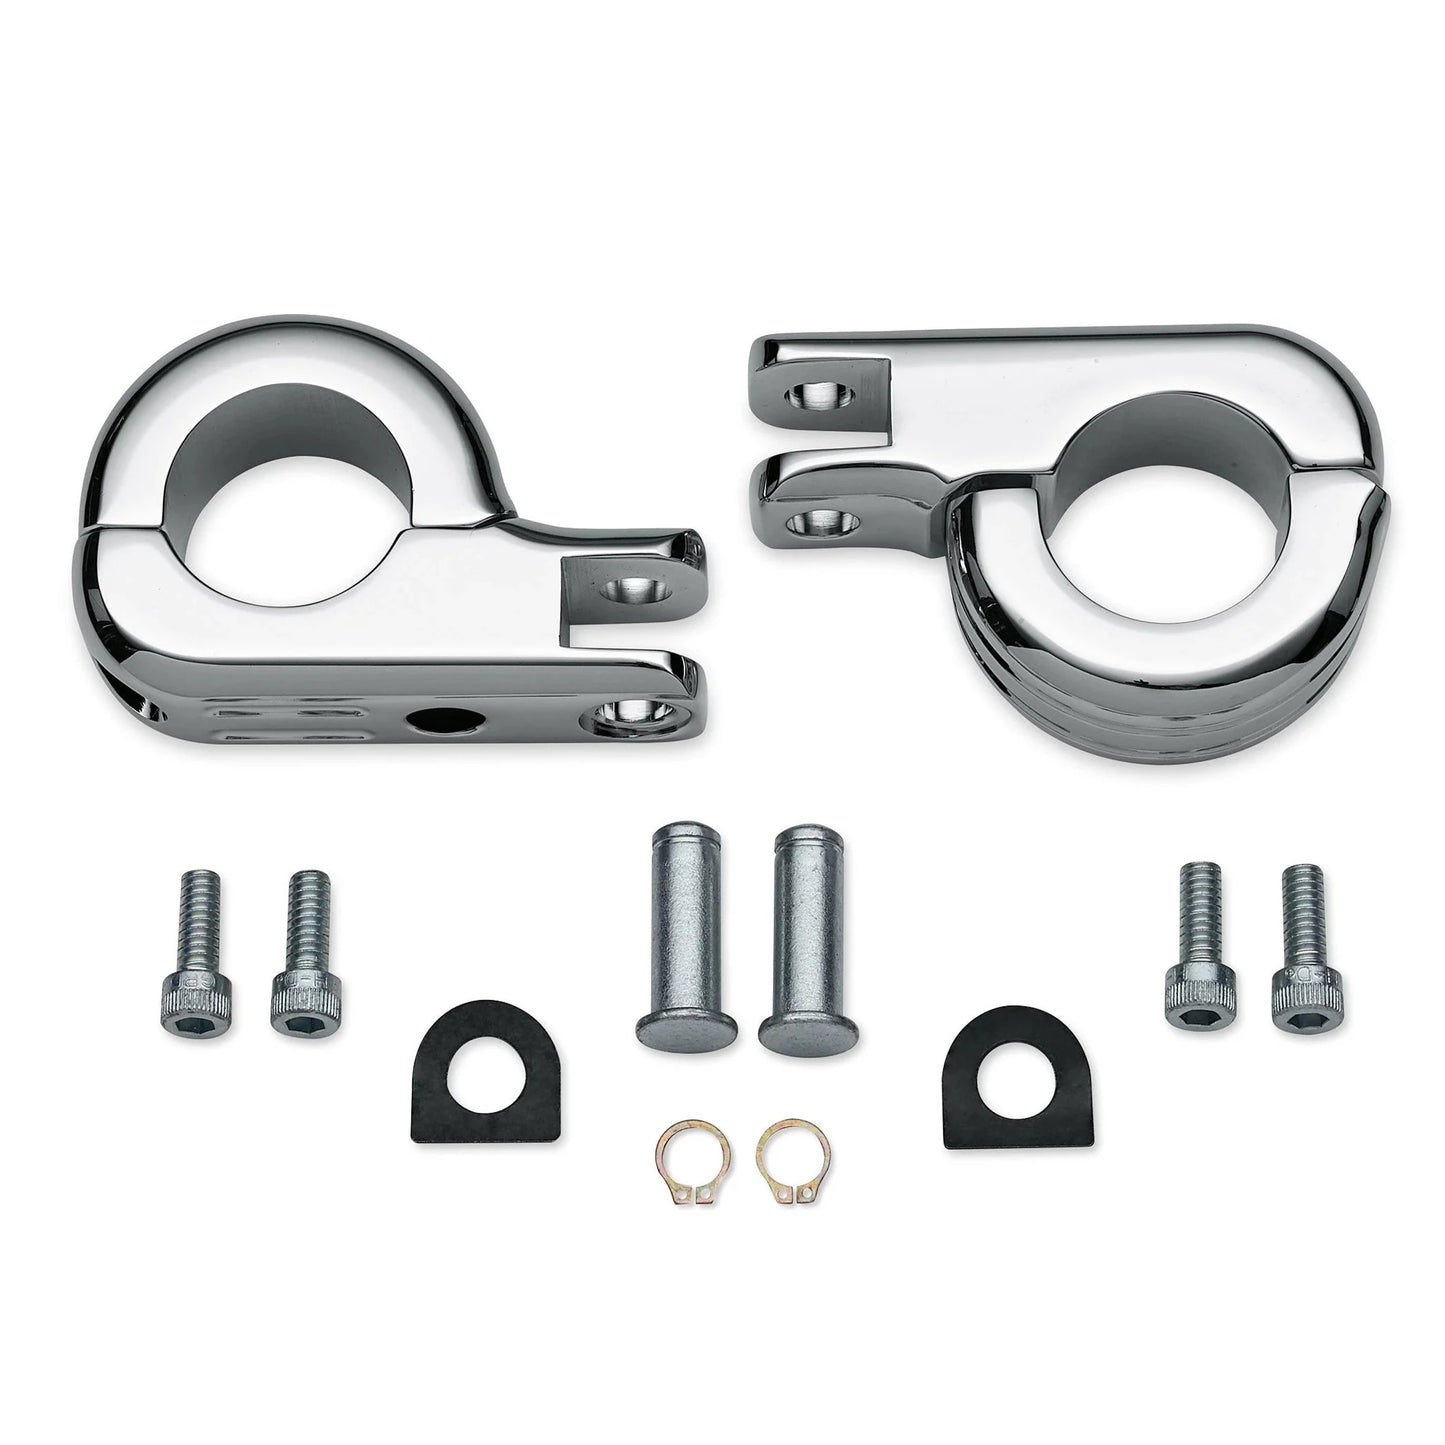 Mounting Kit for Harley-Davidson Engine guard male mount  foot pegs (image of kit).